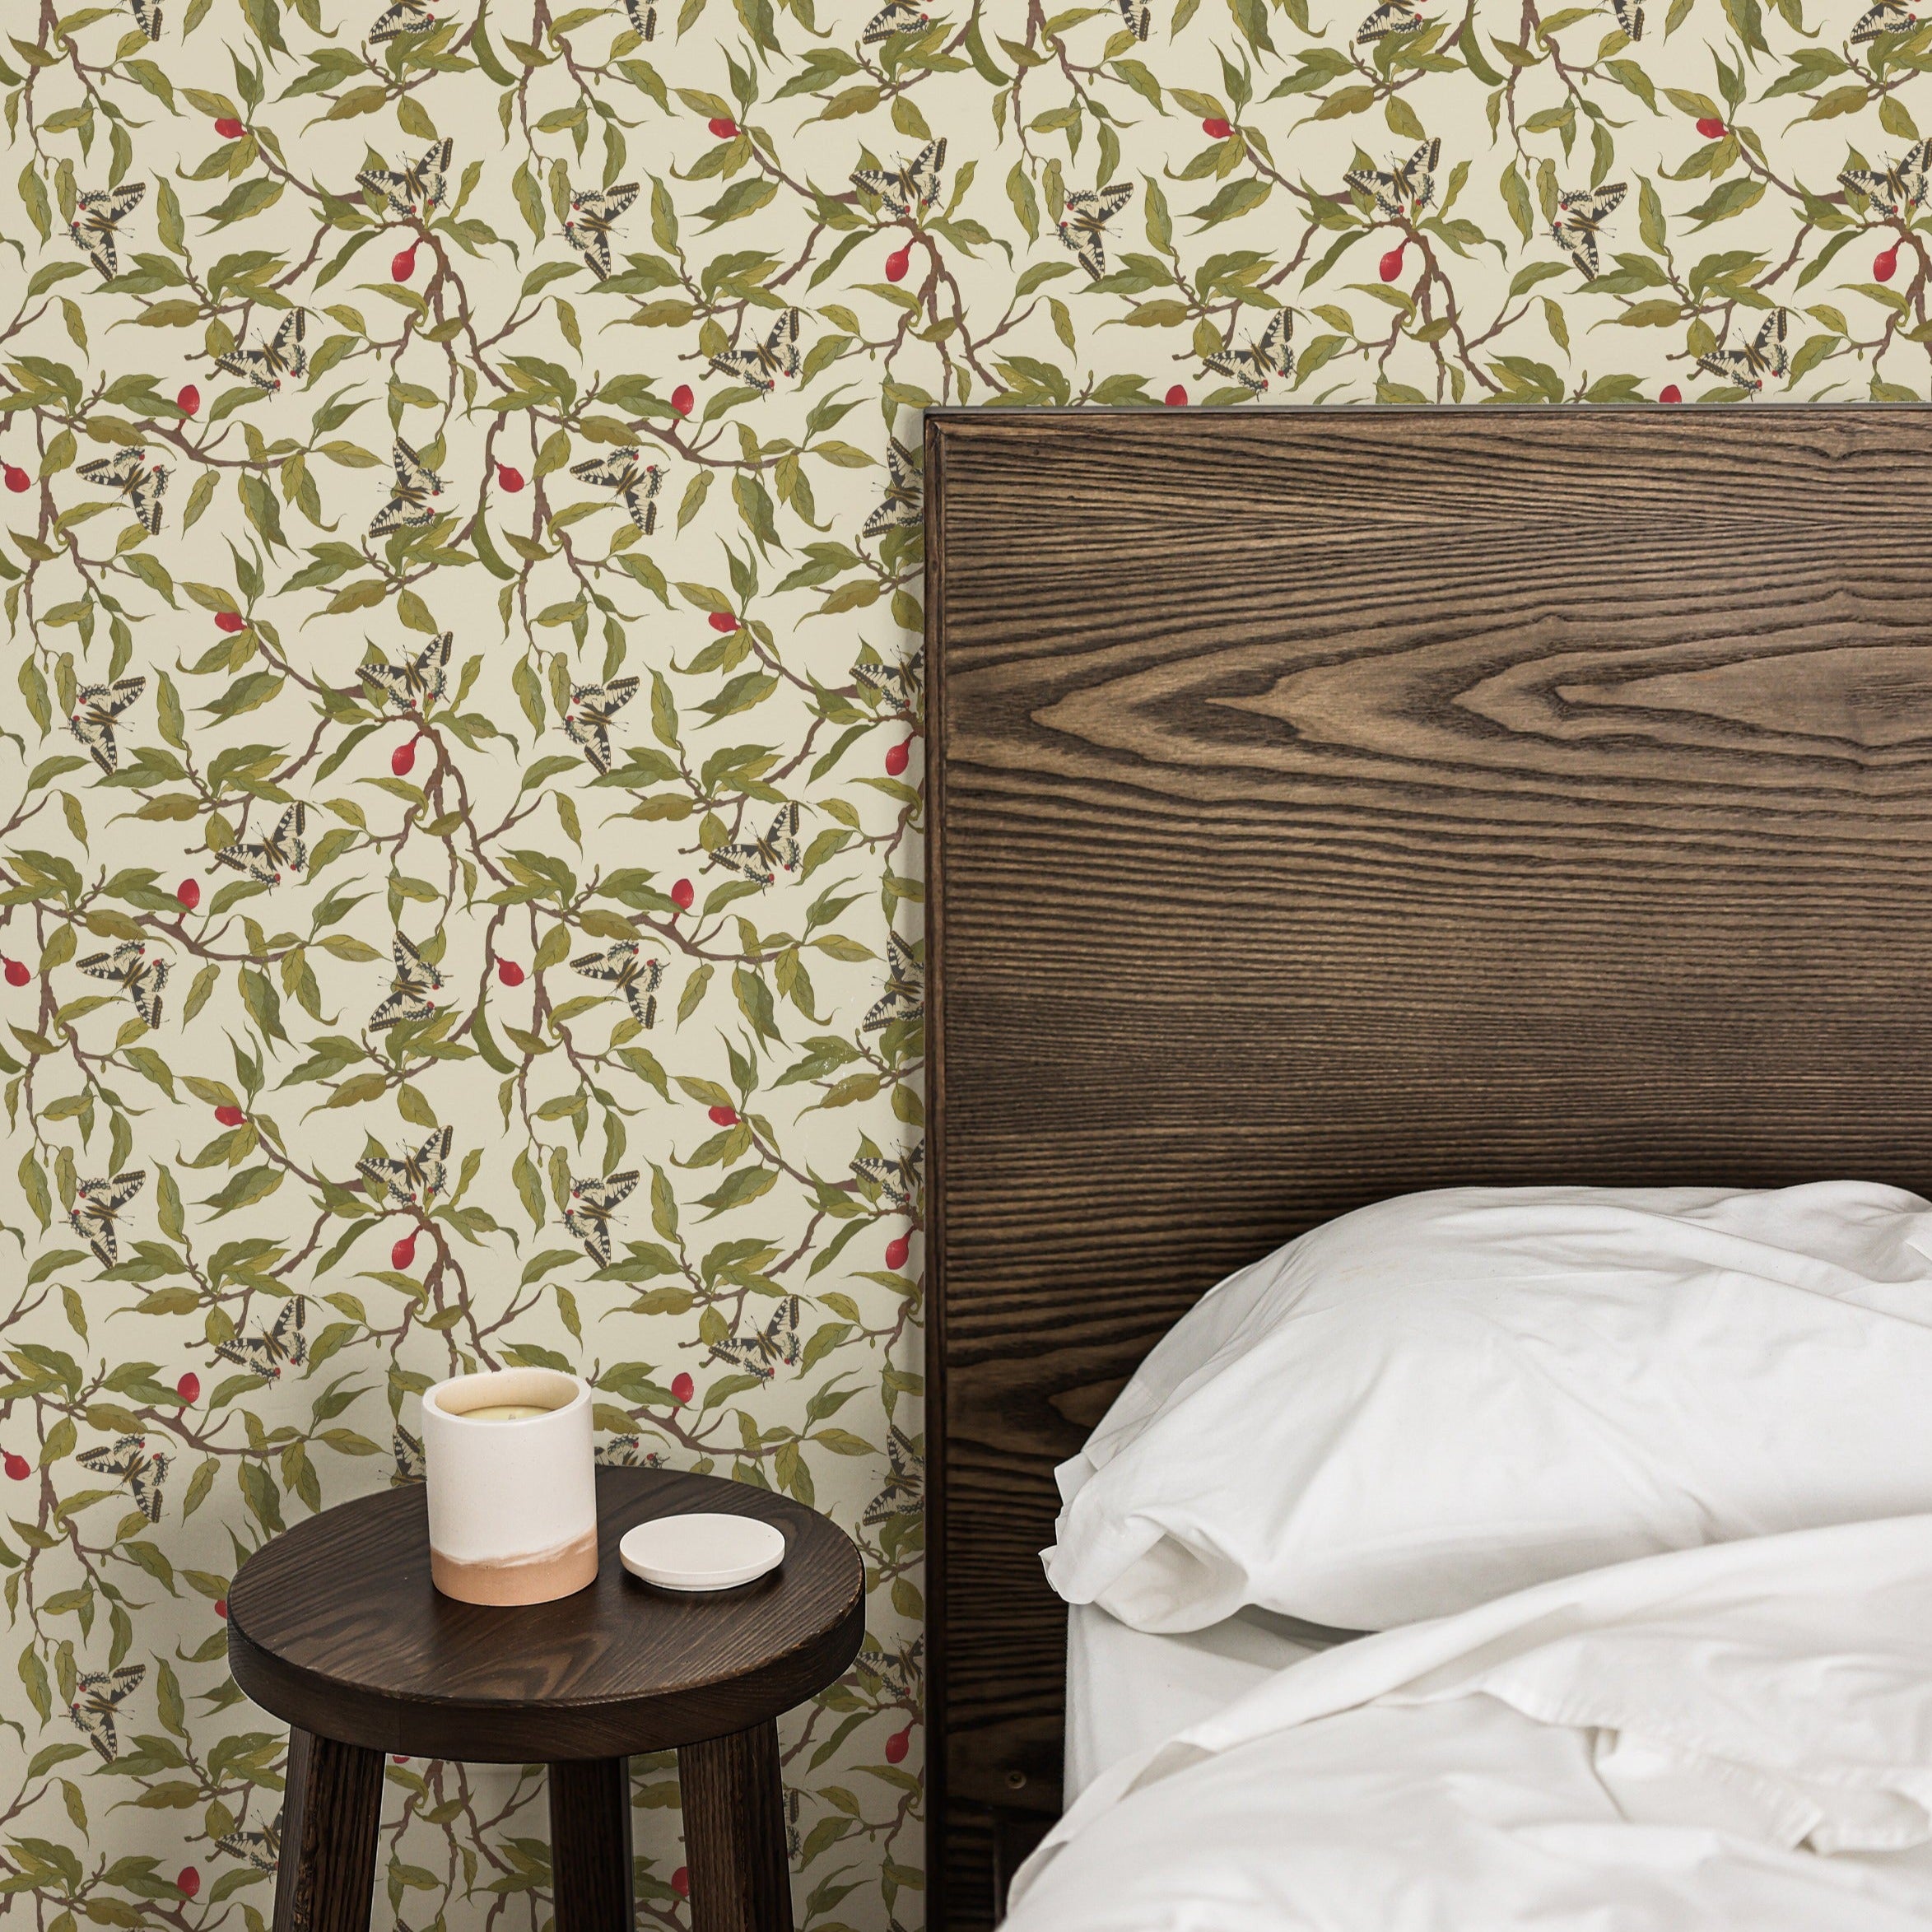 A stylish bedroom with a wooden headboard and a minimalist side table, set against a wall adorned with Vintage Garden Wallpaper. The wallpaper's nature-inspired pattern enhances the room's aesthetic, adding a touch of elegance and tranquility.